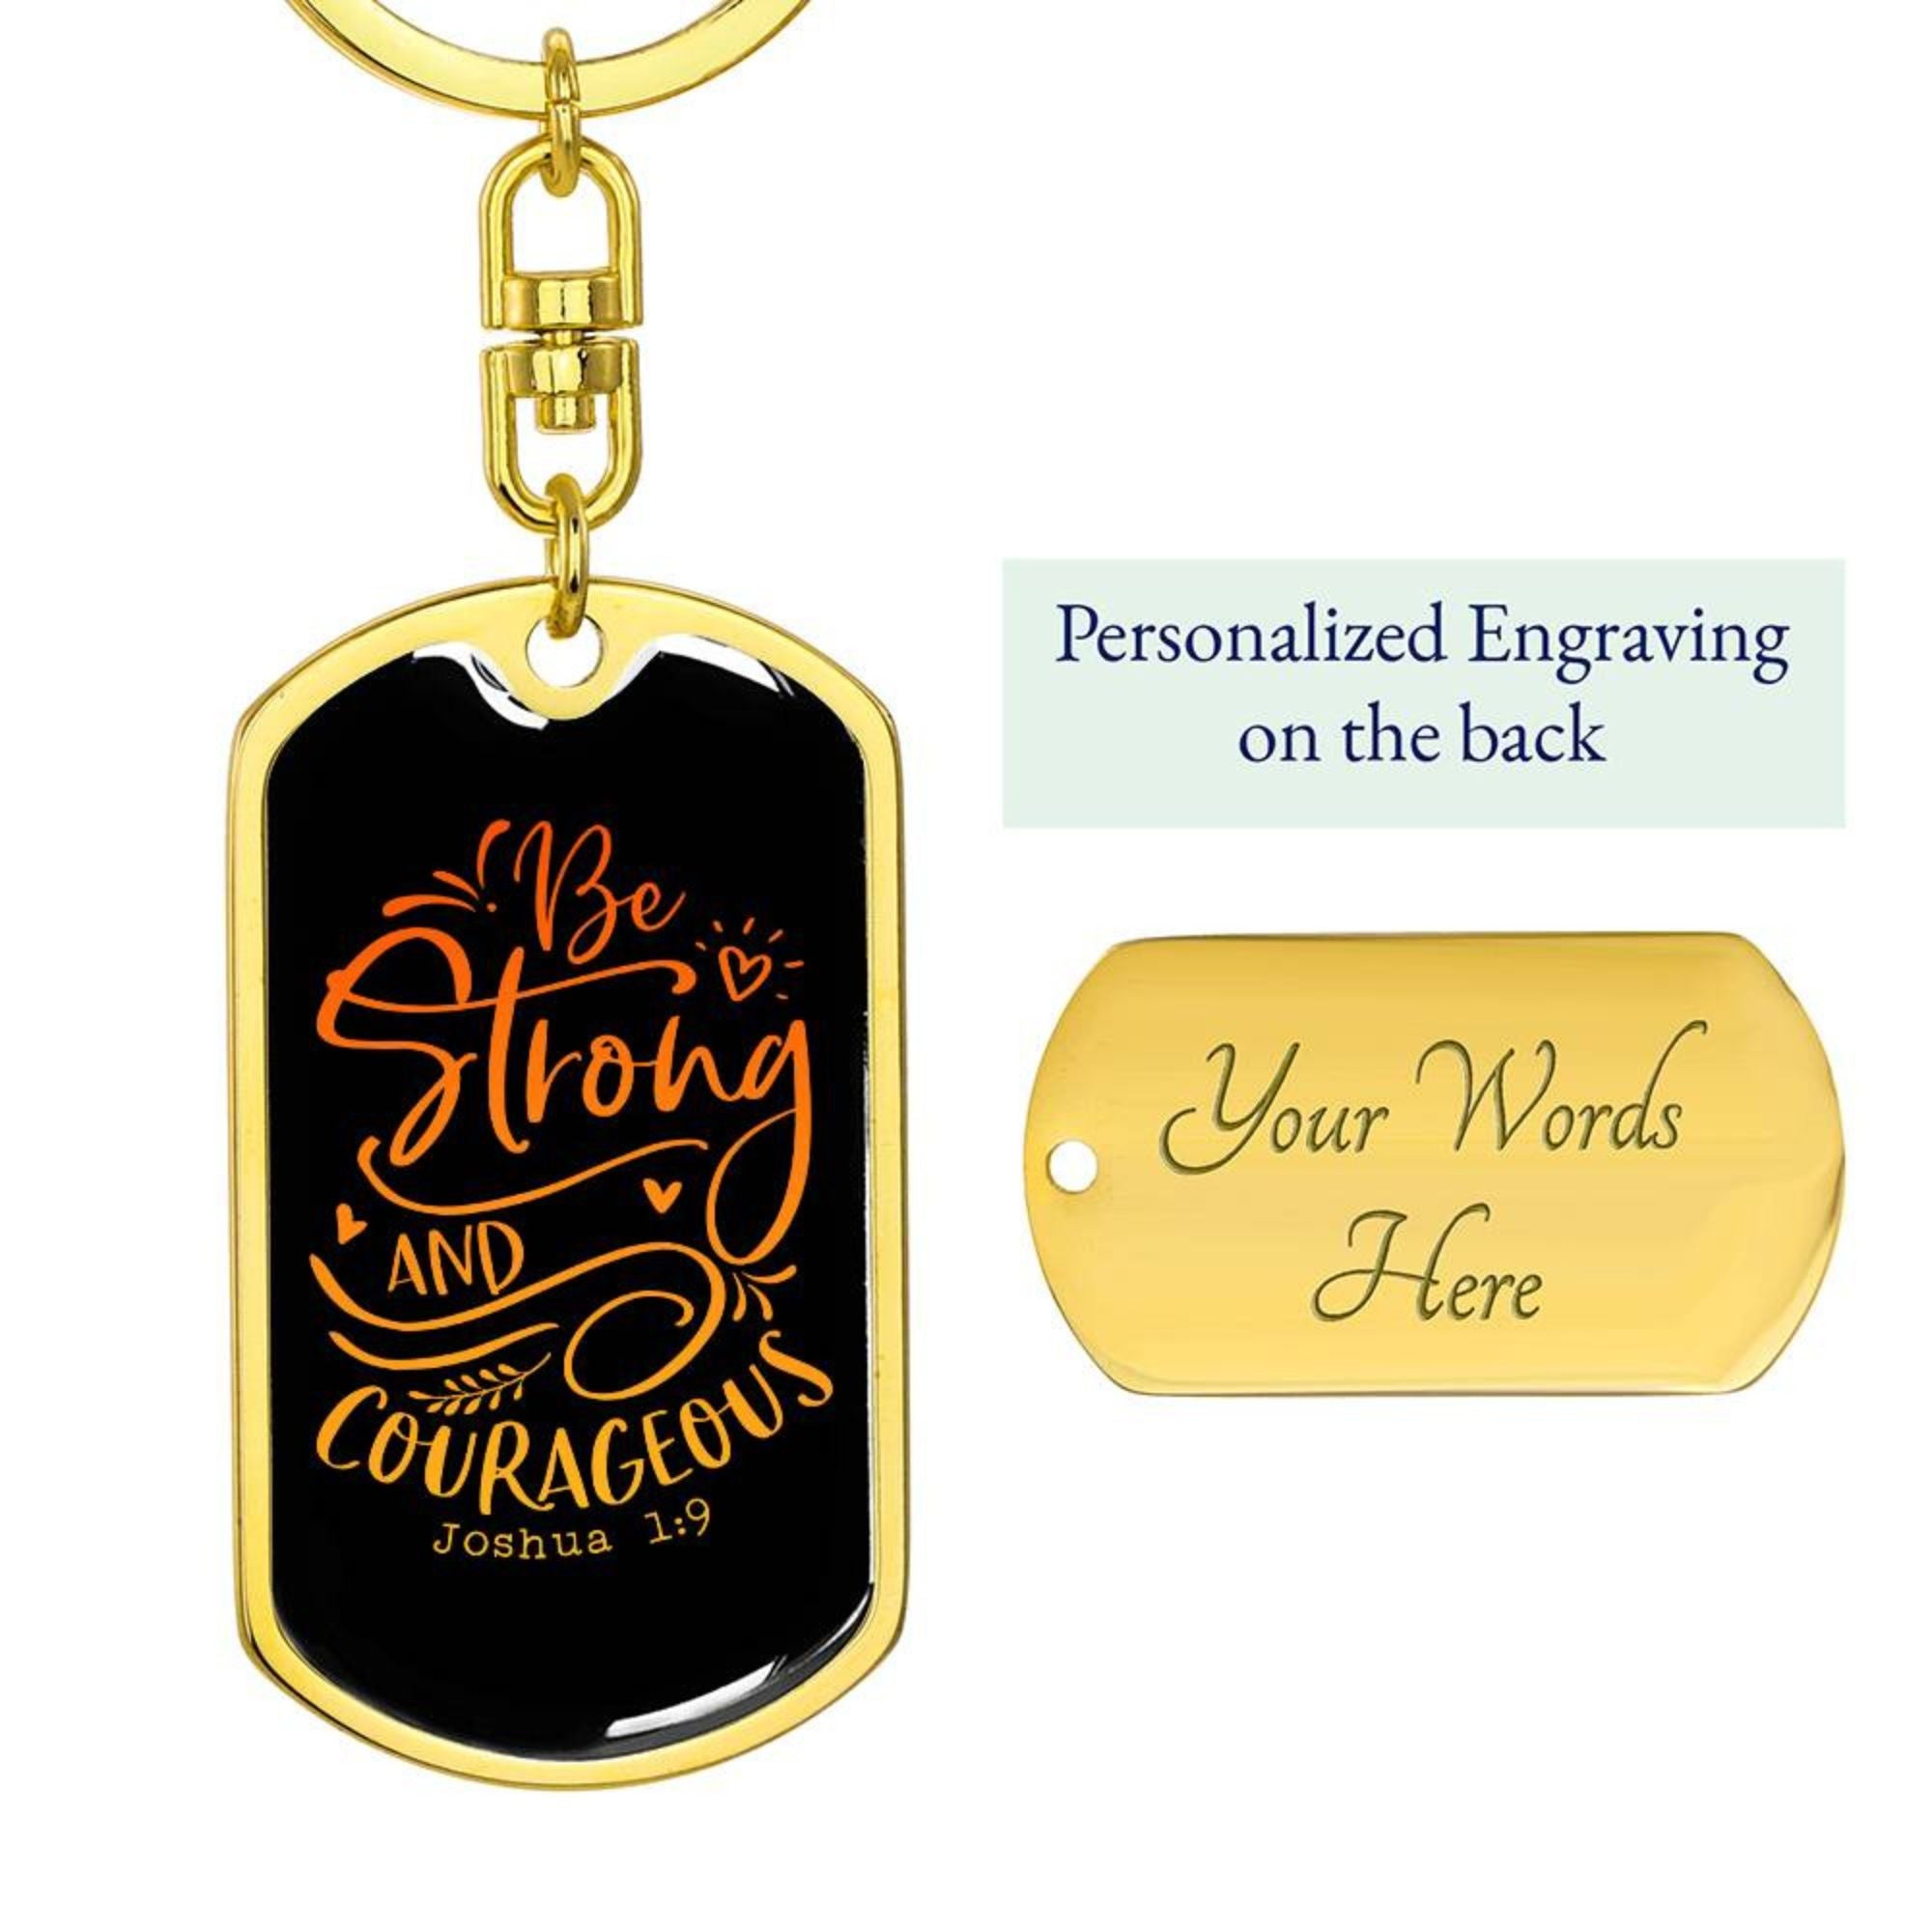 Be Strong and Courageous - Orange Dog Tag with Swivel Keychain Engraving: Yes Jesus Passion Apparel